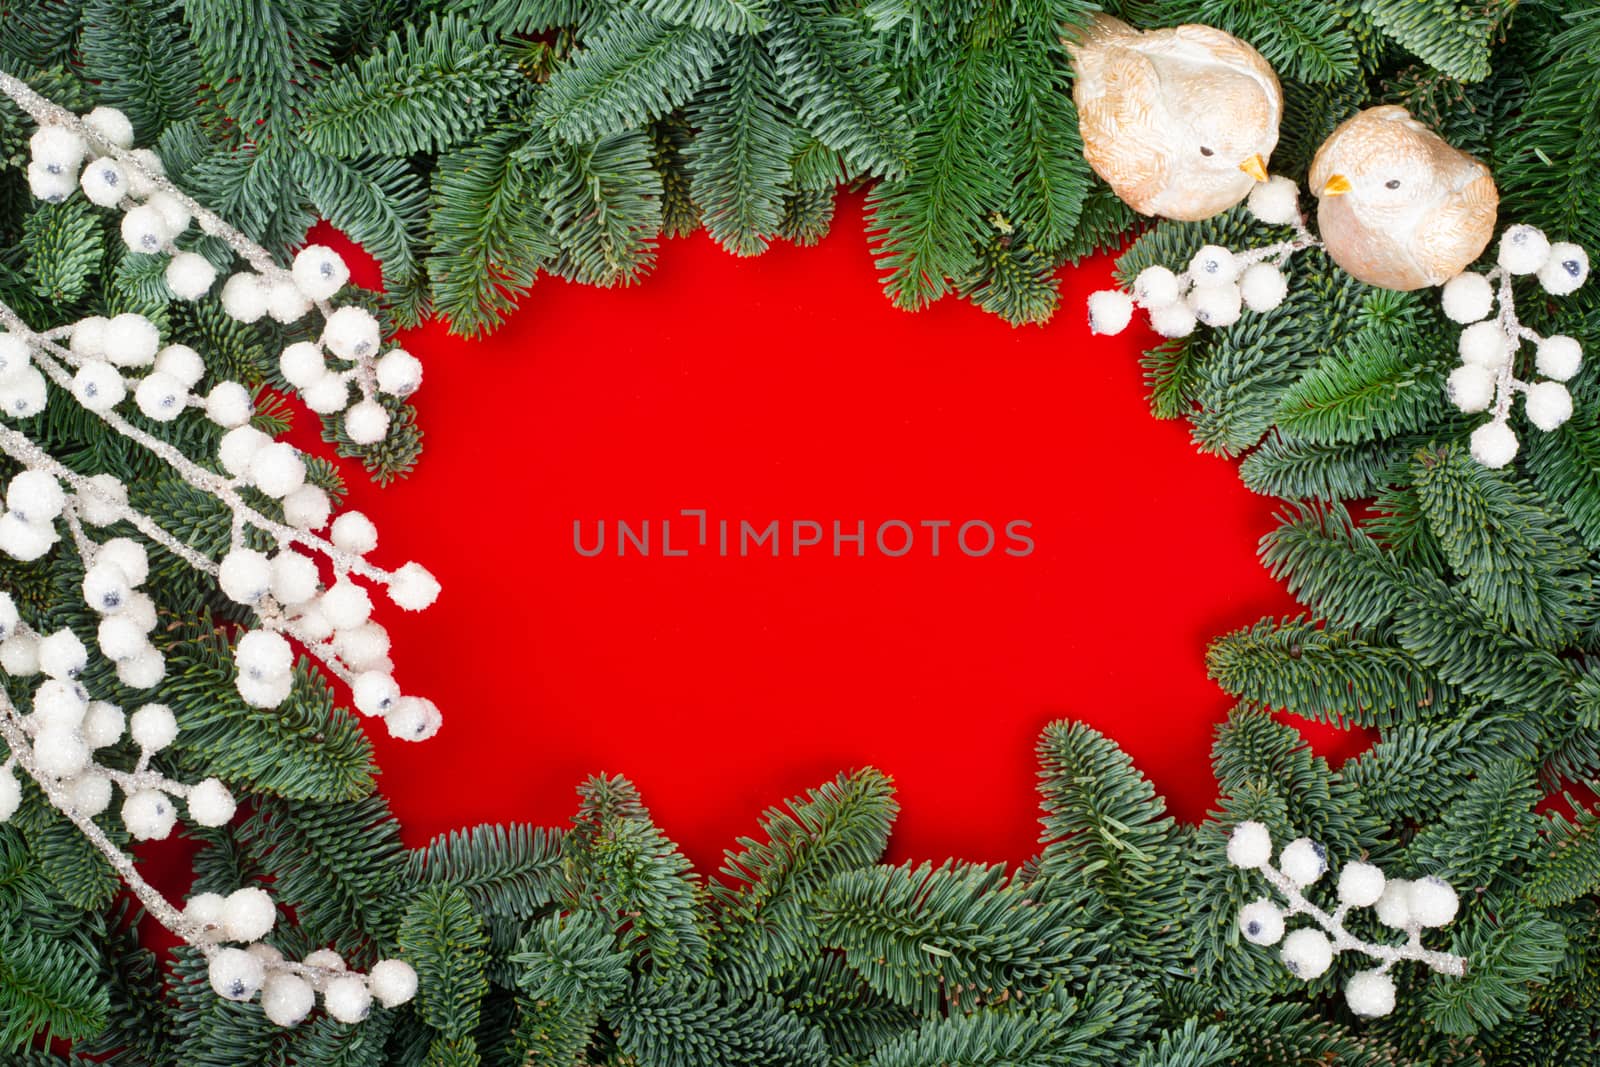 Christmas fir tree branches decor border frame on red background with copy space for text